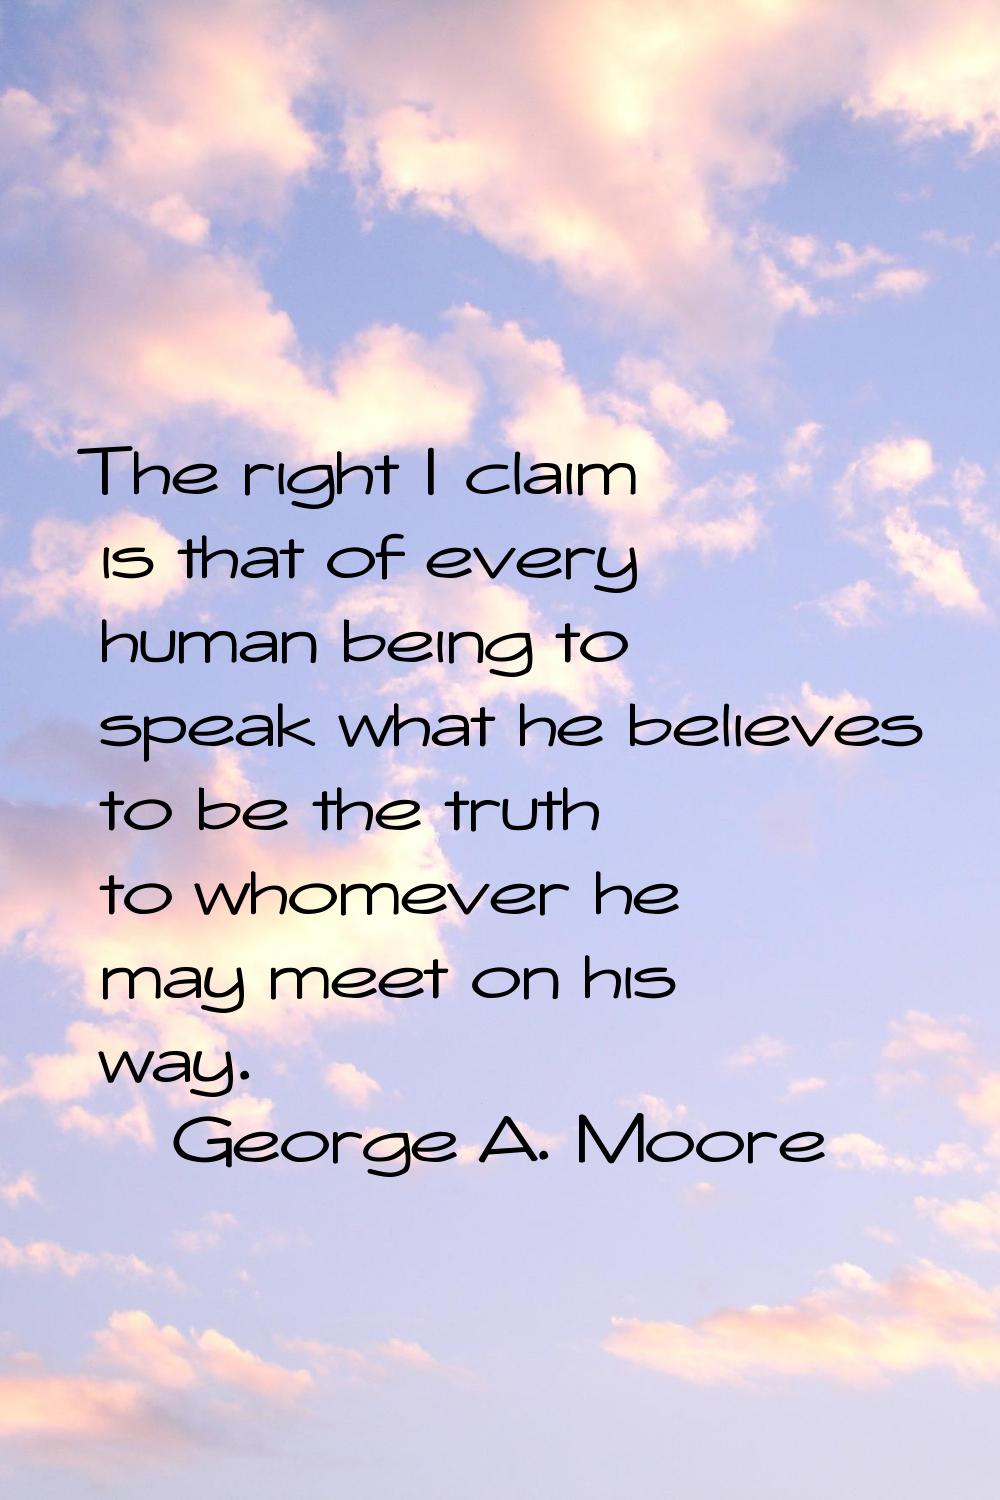 The right I claim is that of every human being to speak what he believes to be the truth to whomeve